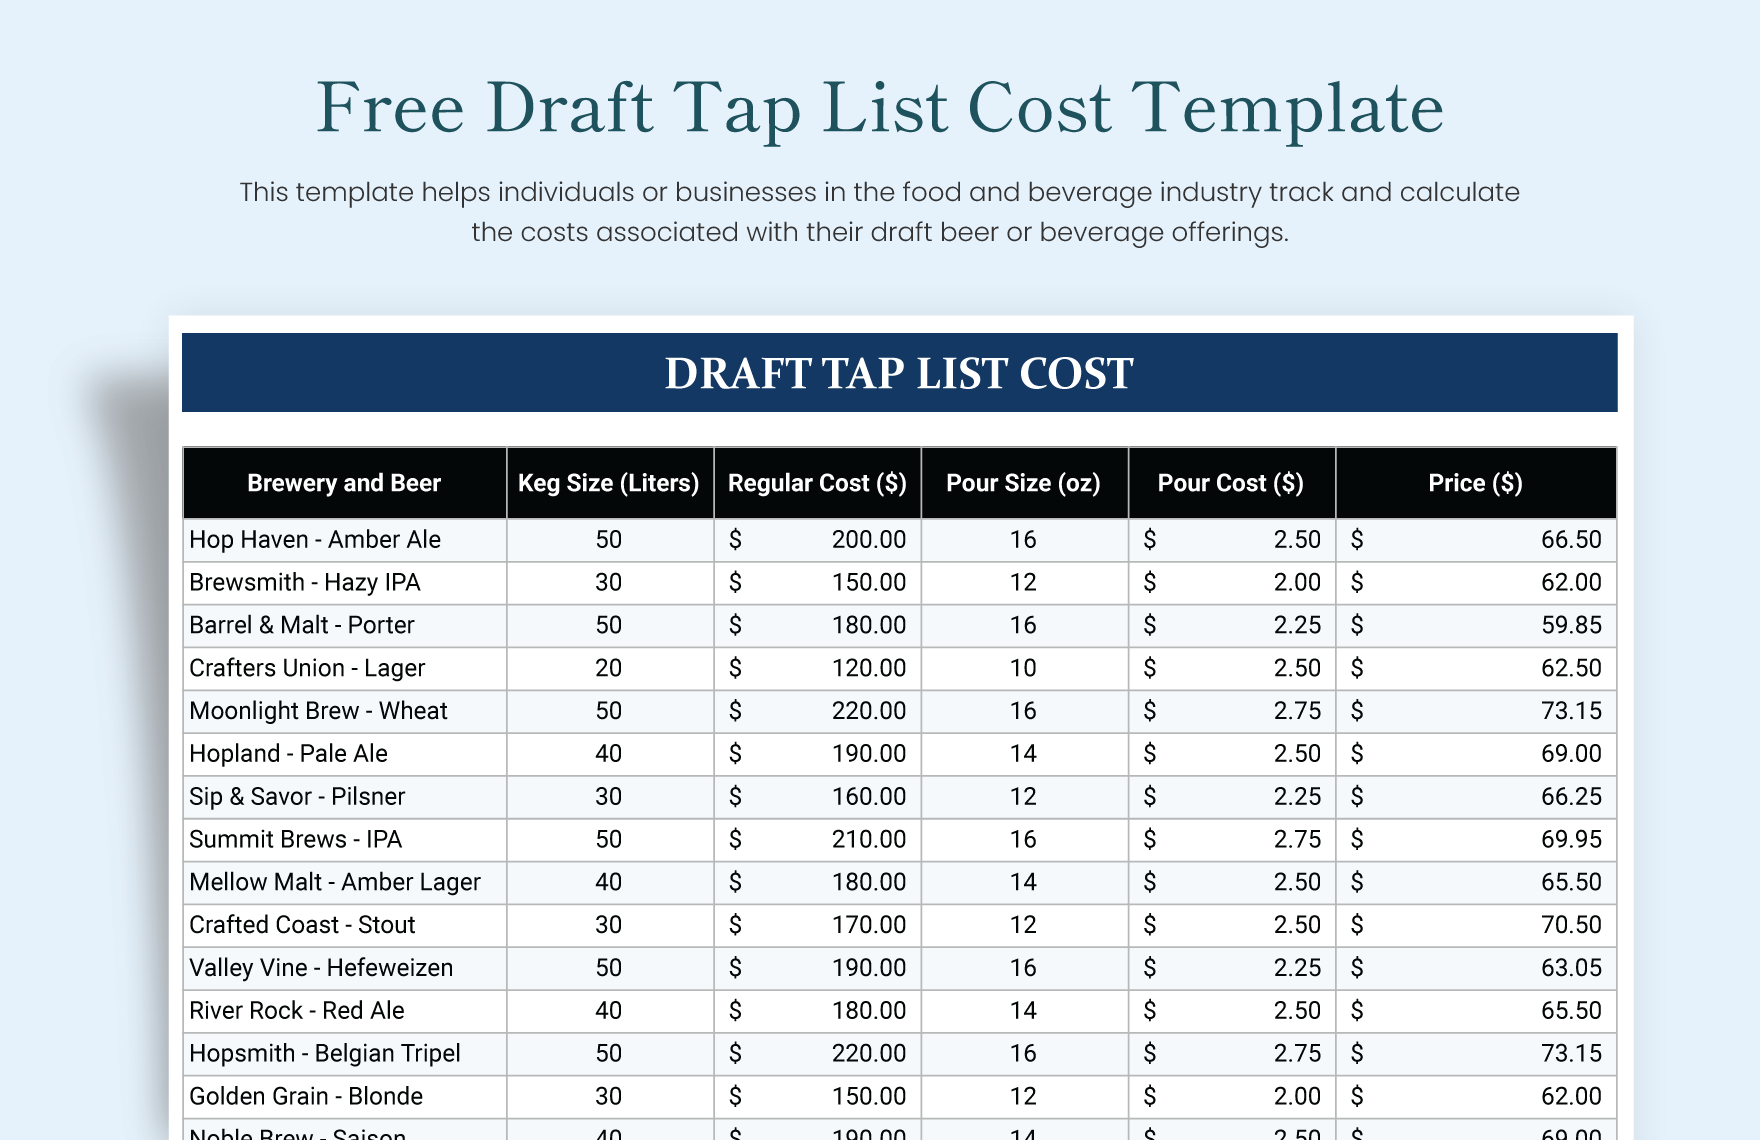 Draft Tap List Cost Template